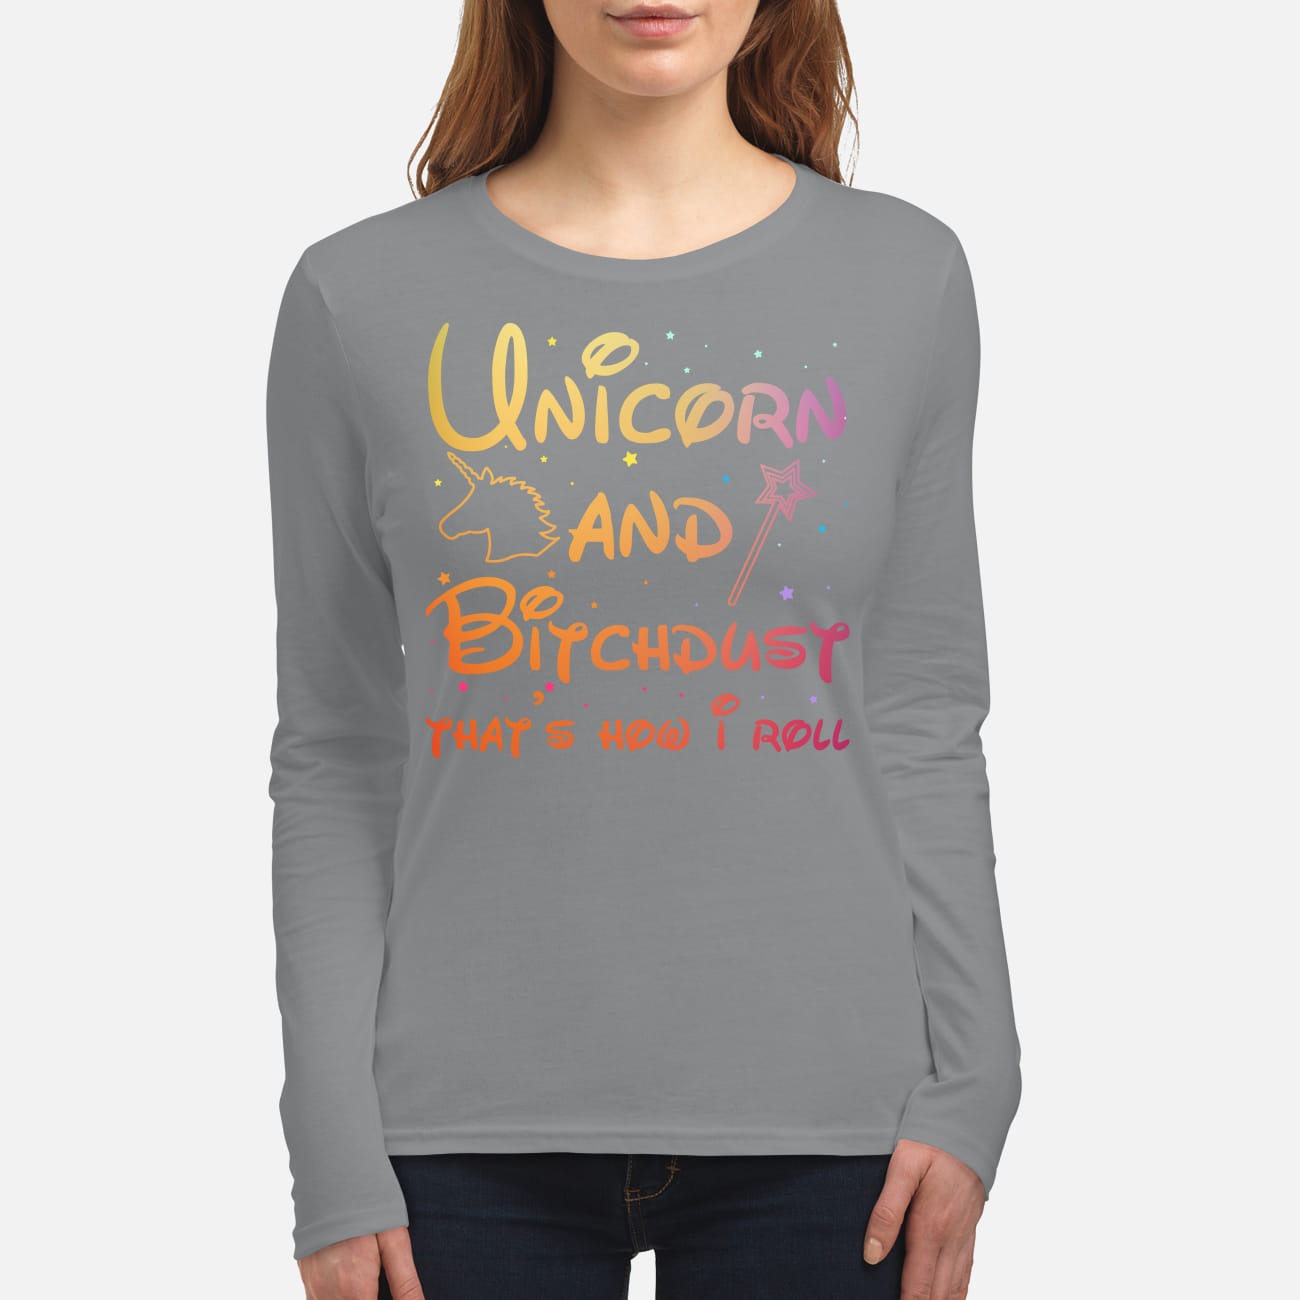 Unicorn and bitchdust that's how I roll women's long sleeved shirt